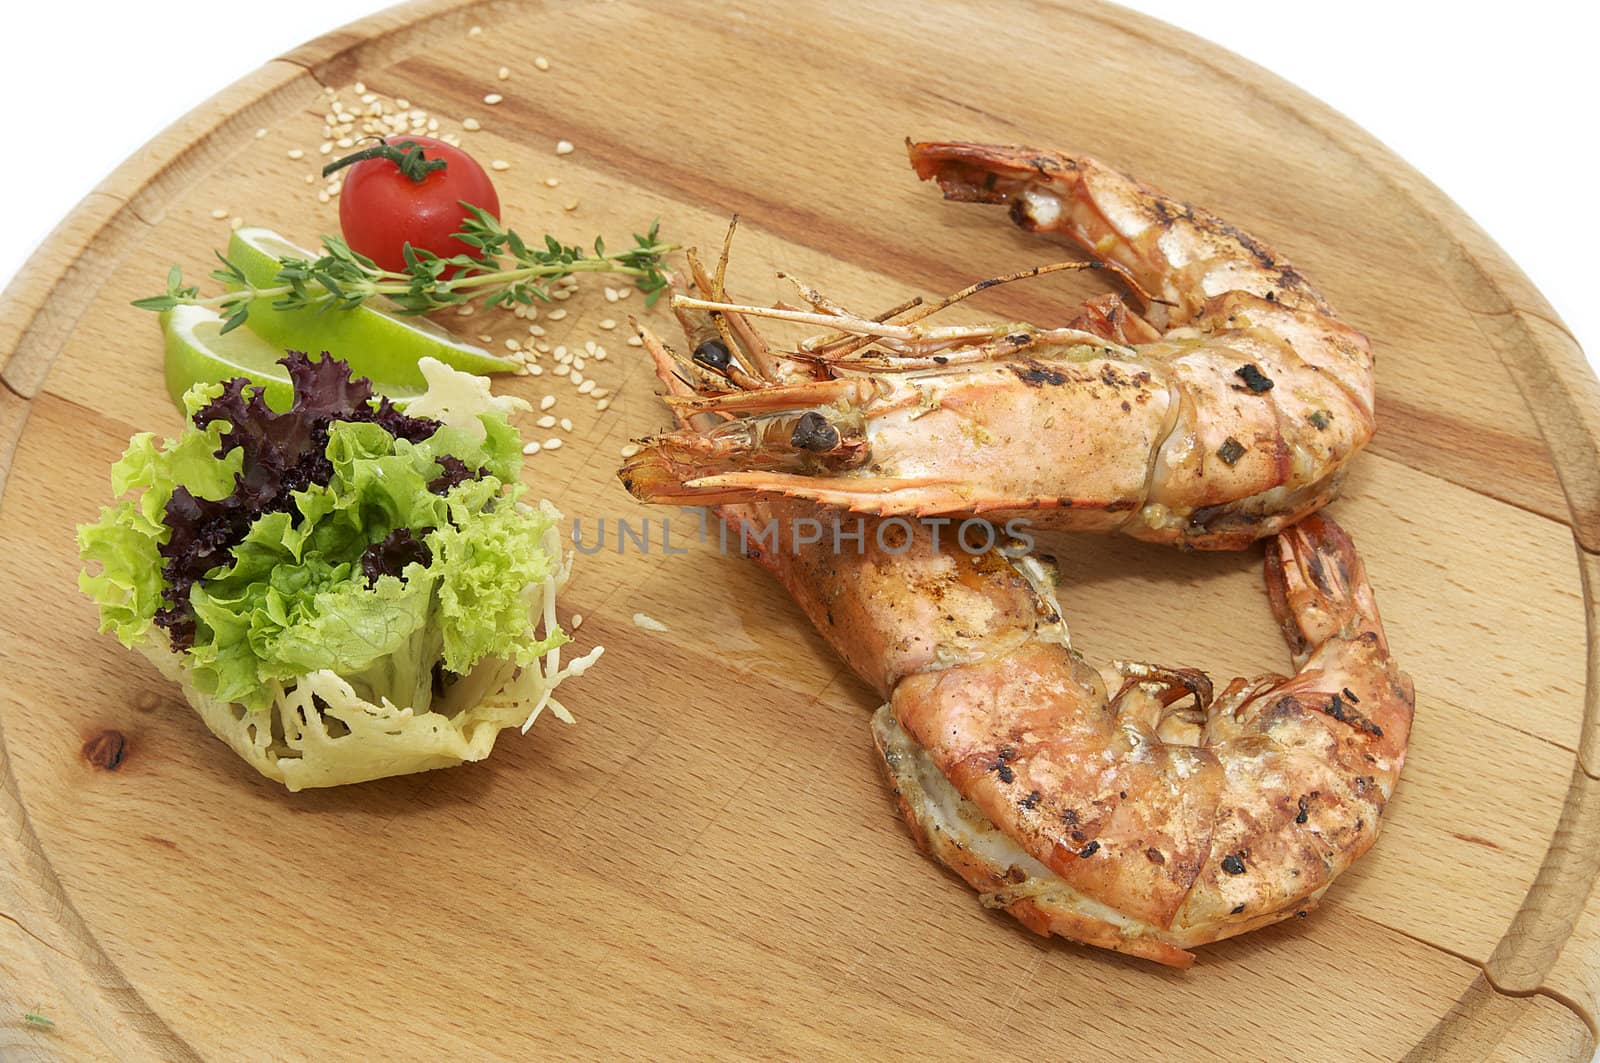 Grilled Shrimp with Orange on a wooden plate